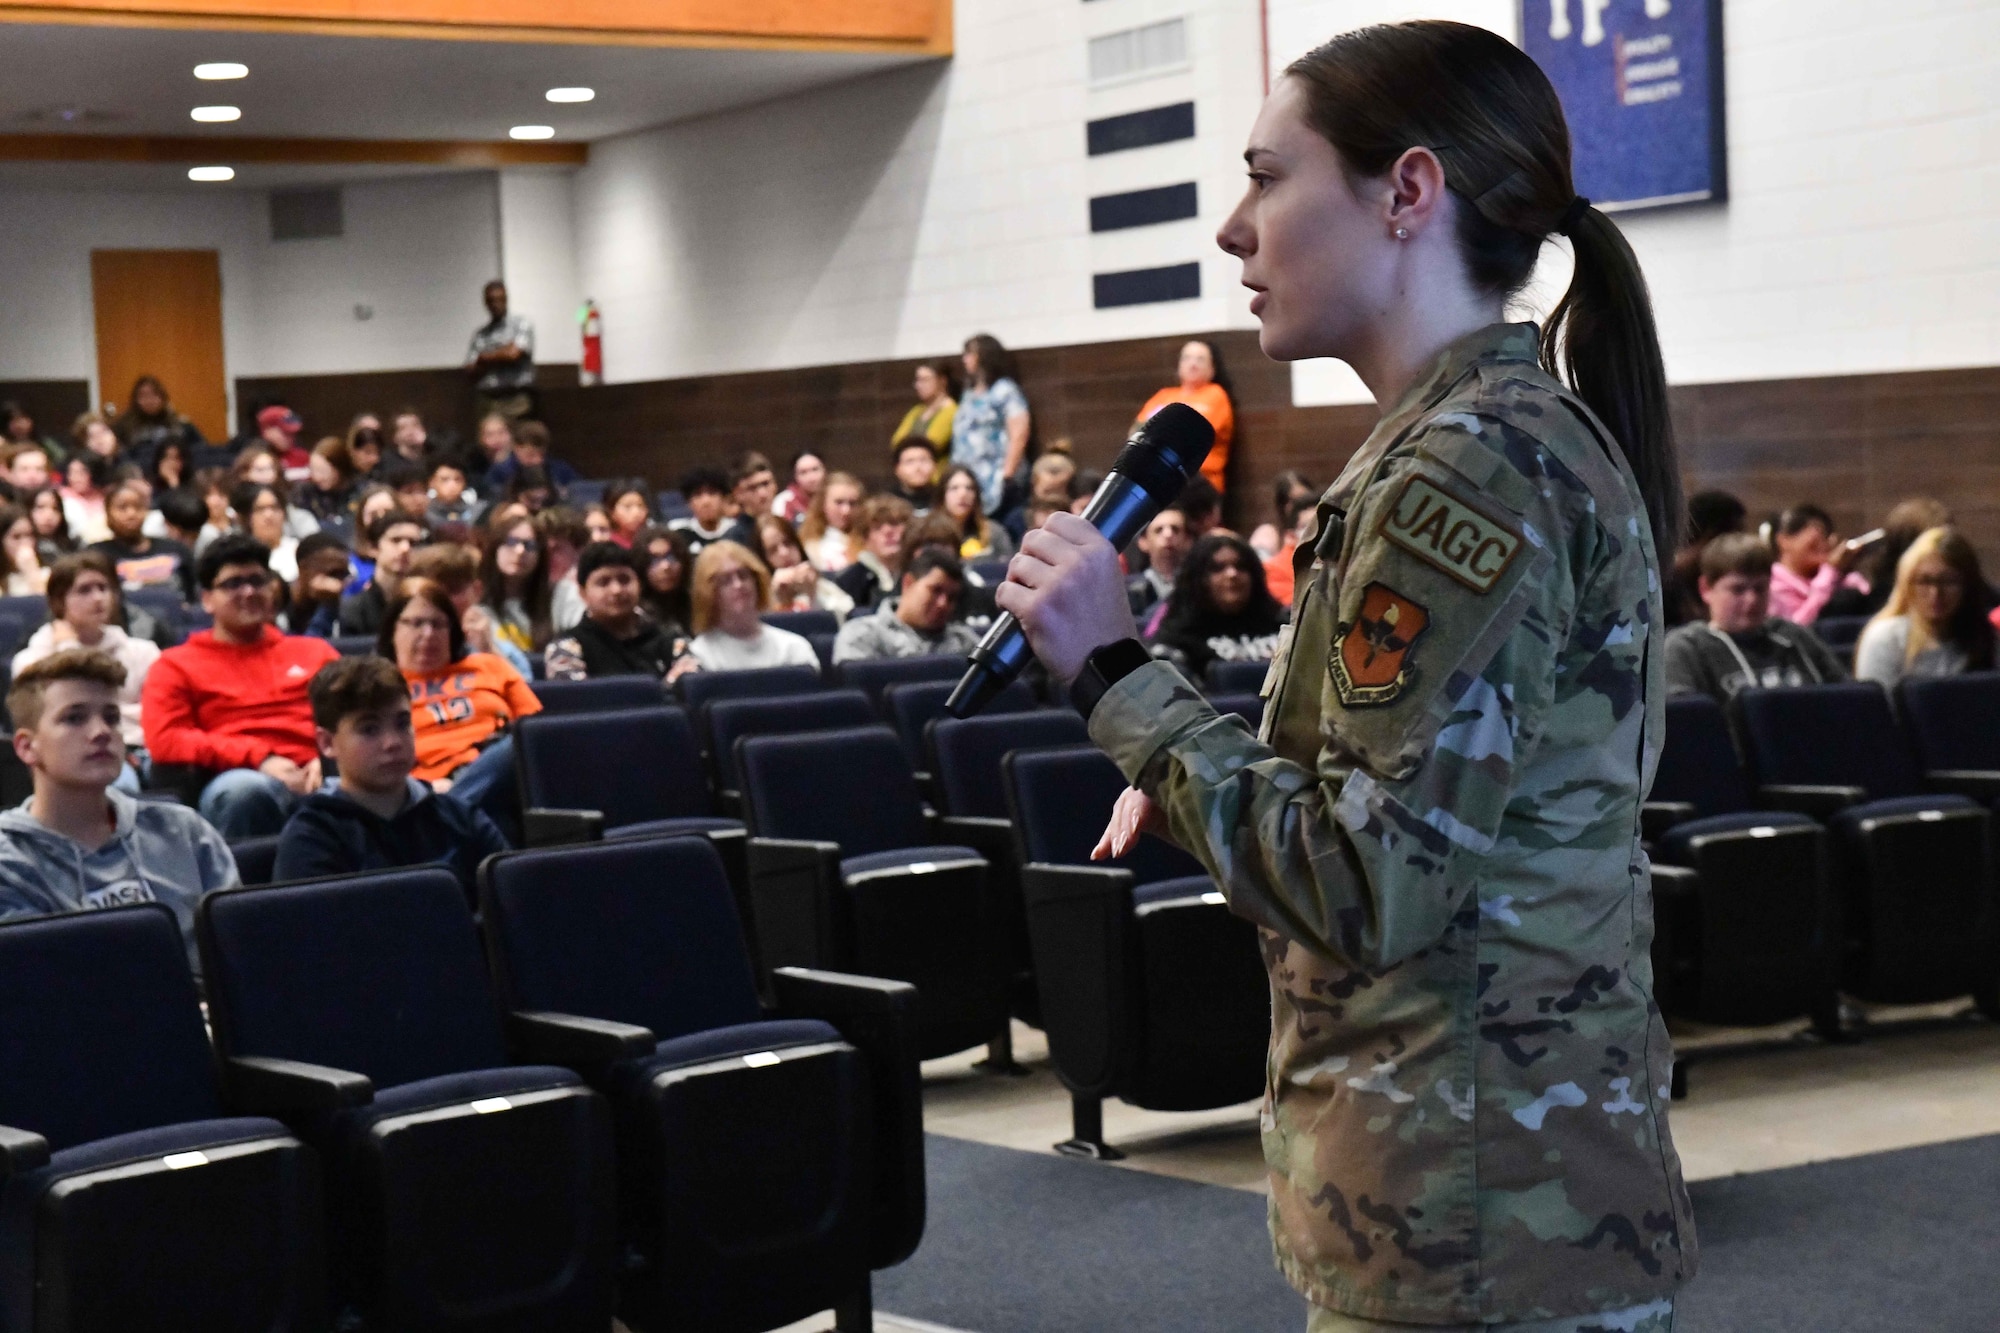 U.S. Air Force Airman 1st Class Delaney Maufroy, 97th Judge Advocate paralegal, speaks to students during a Red Ribbon Week presentation at Altus High School, Oklahoma, Oct. 26, 2022. Maufroy’s speech focused on the legal disciplines one must face after consuming, possessing or selling illegal substances. (U.S. Air Force photo by Airman 1st Class Miyah Gray)